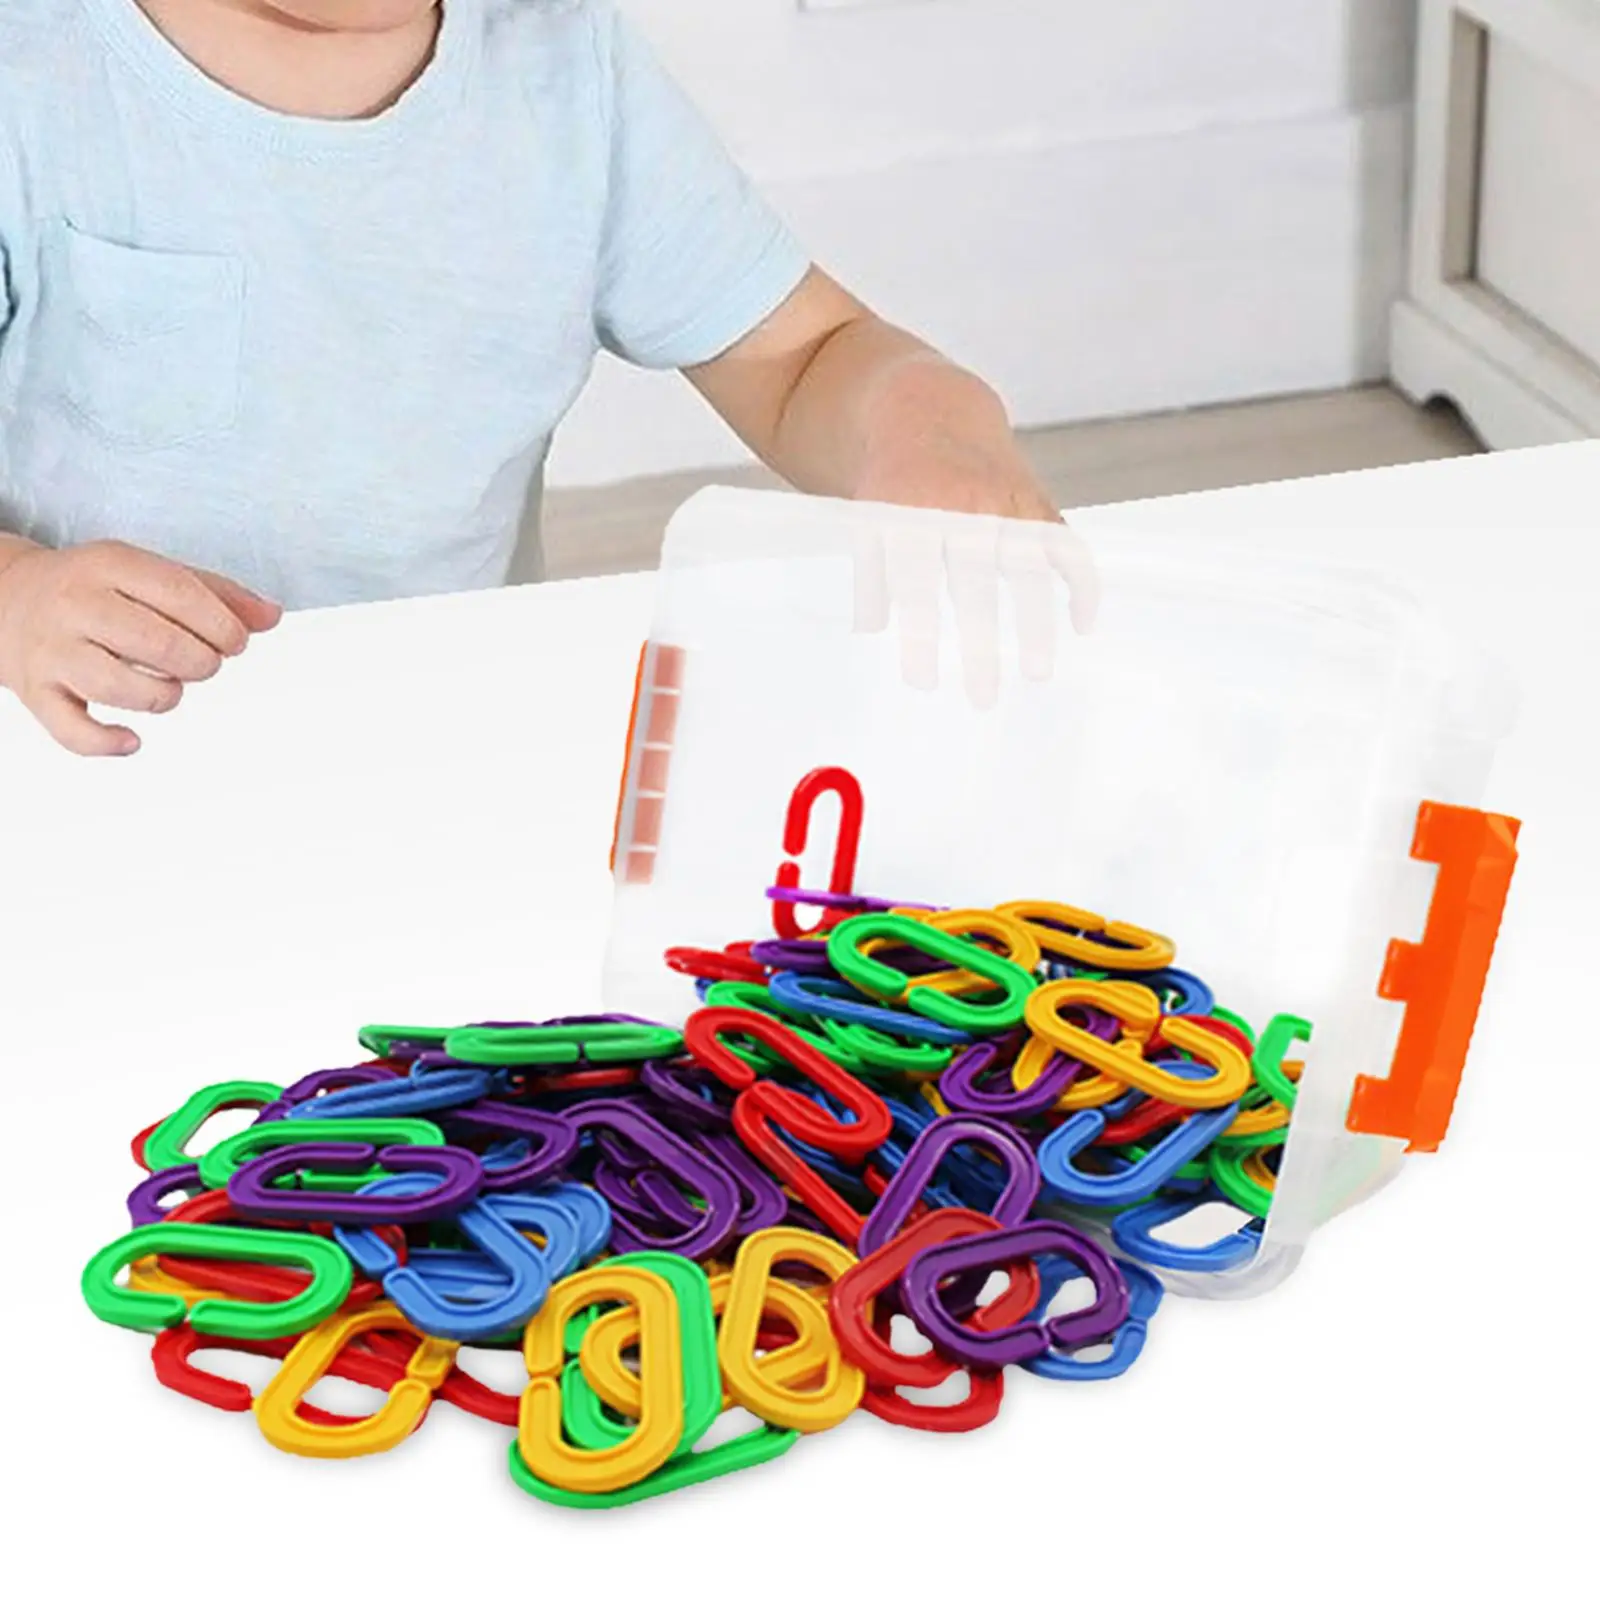 150 Pieces C Hook, Rainbow C Links DIY Toys Bird Swing Chain Educational Colorful Links for Playroom=